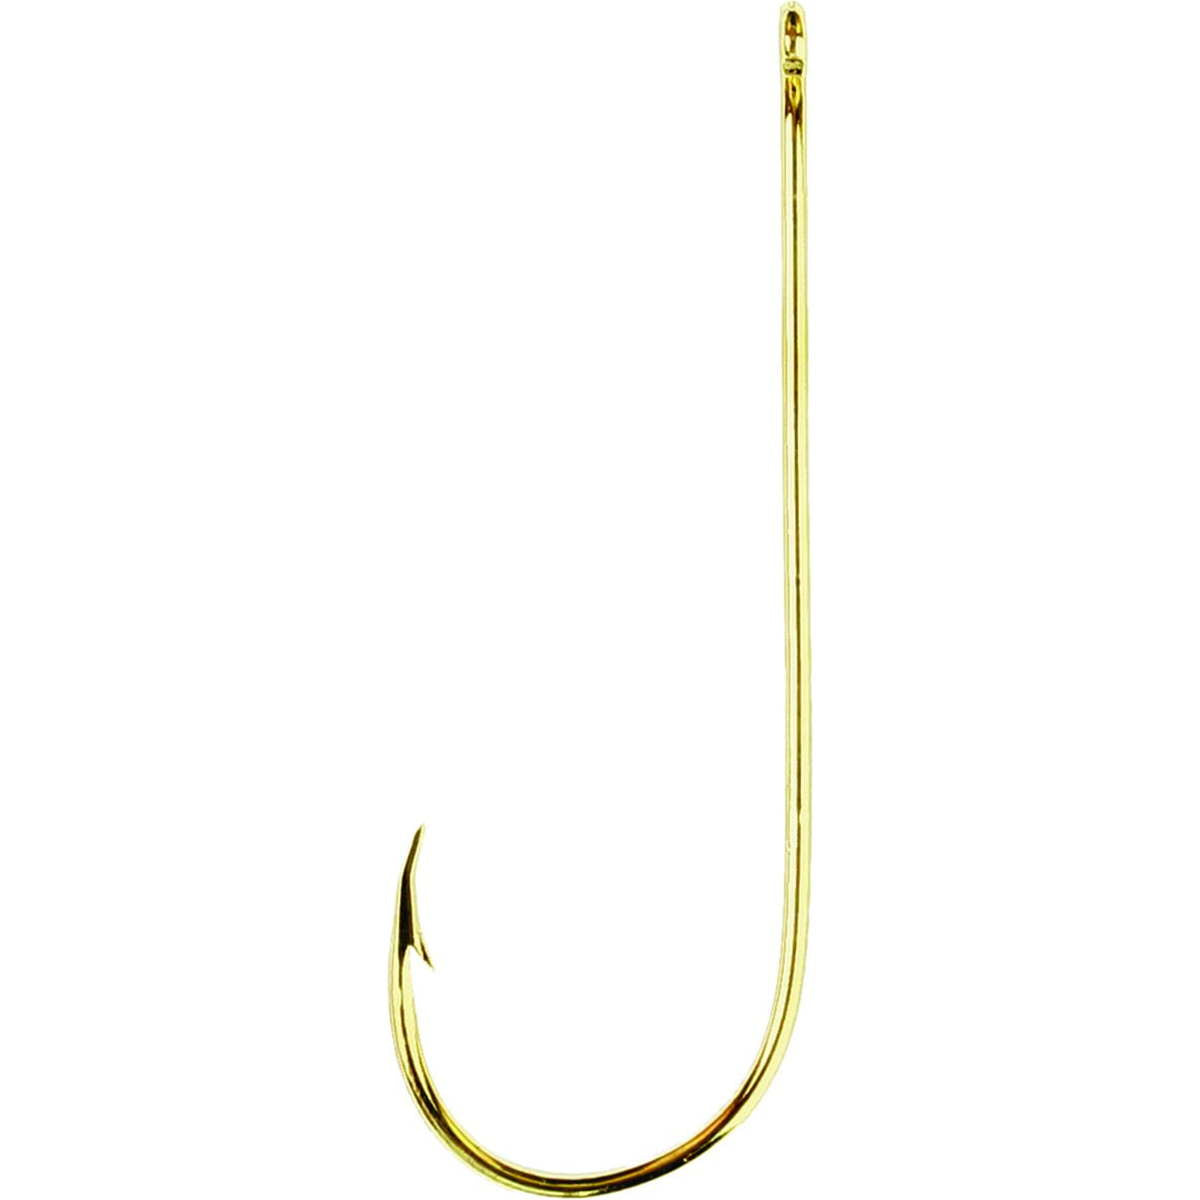 Photo of Eagle Claw Classic Aberdeen Light Wire Hook for sale at United Tackle Shops.